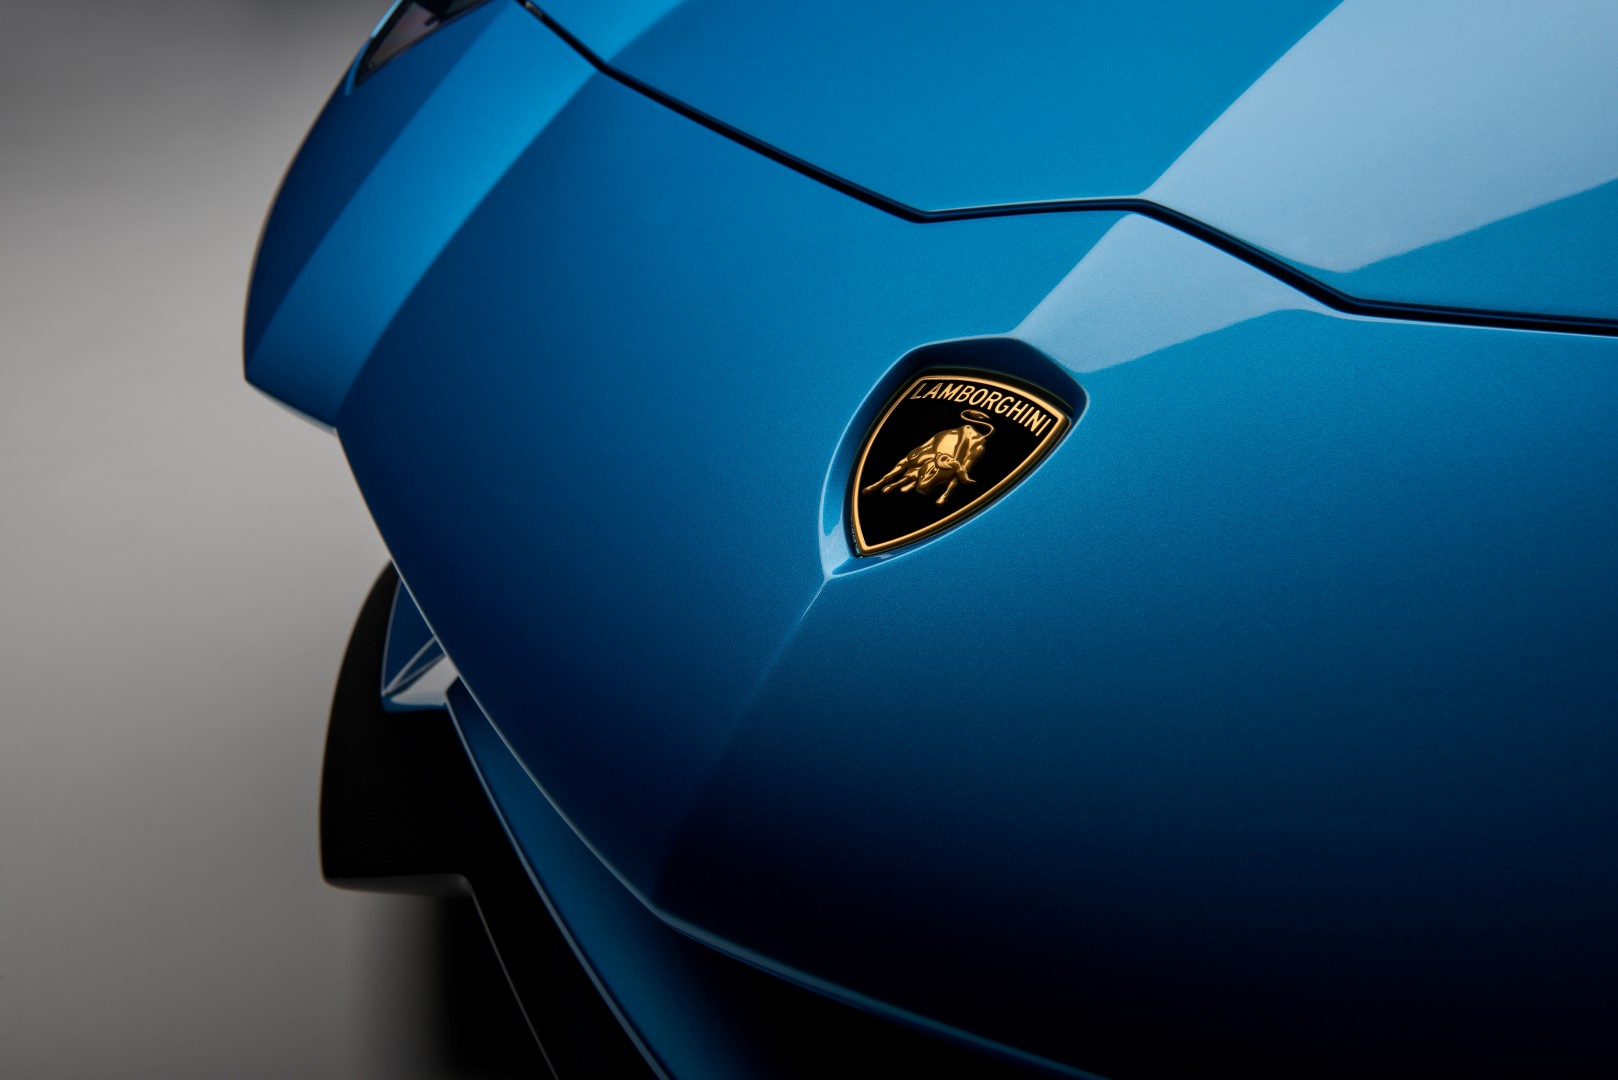 The New Lamborghini Aventador S Roadster Is Official